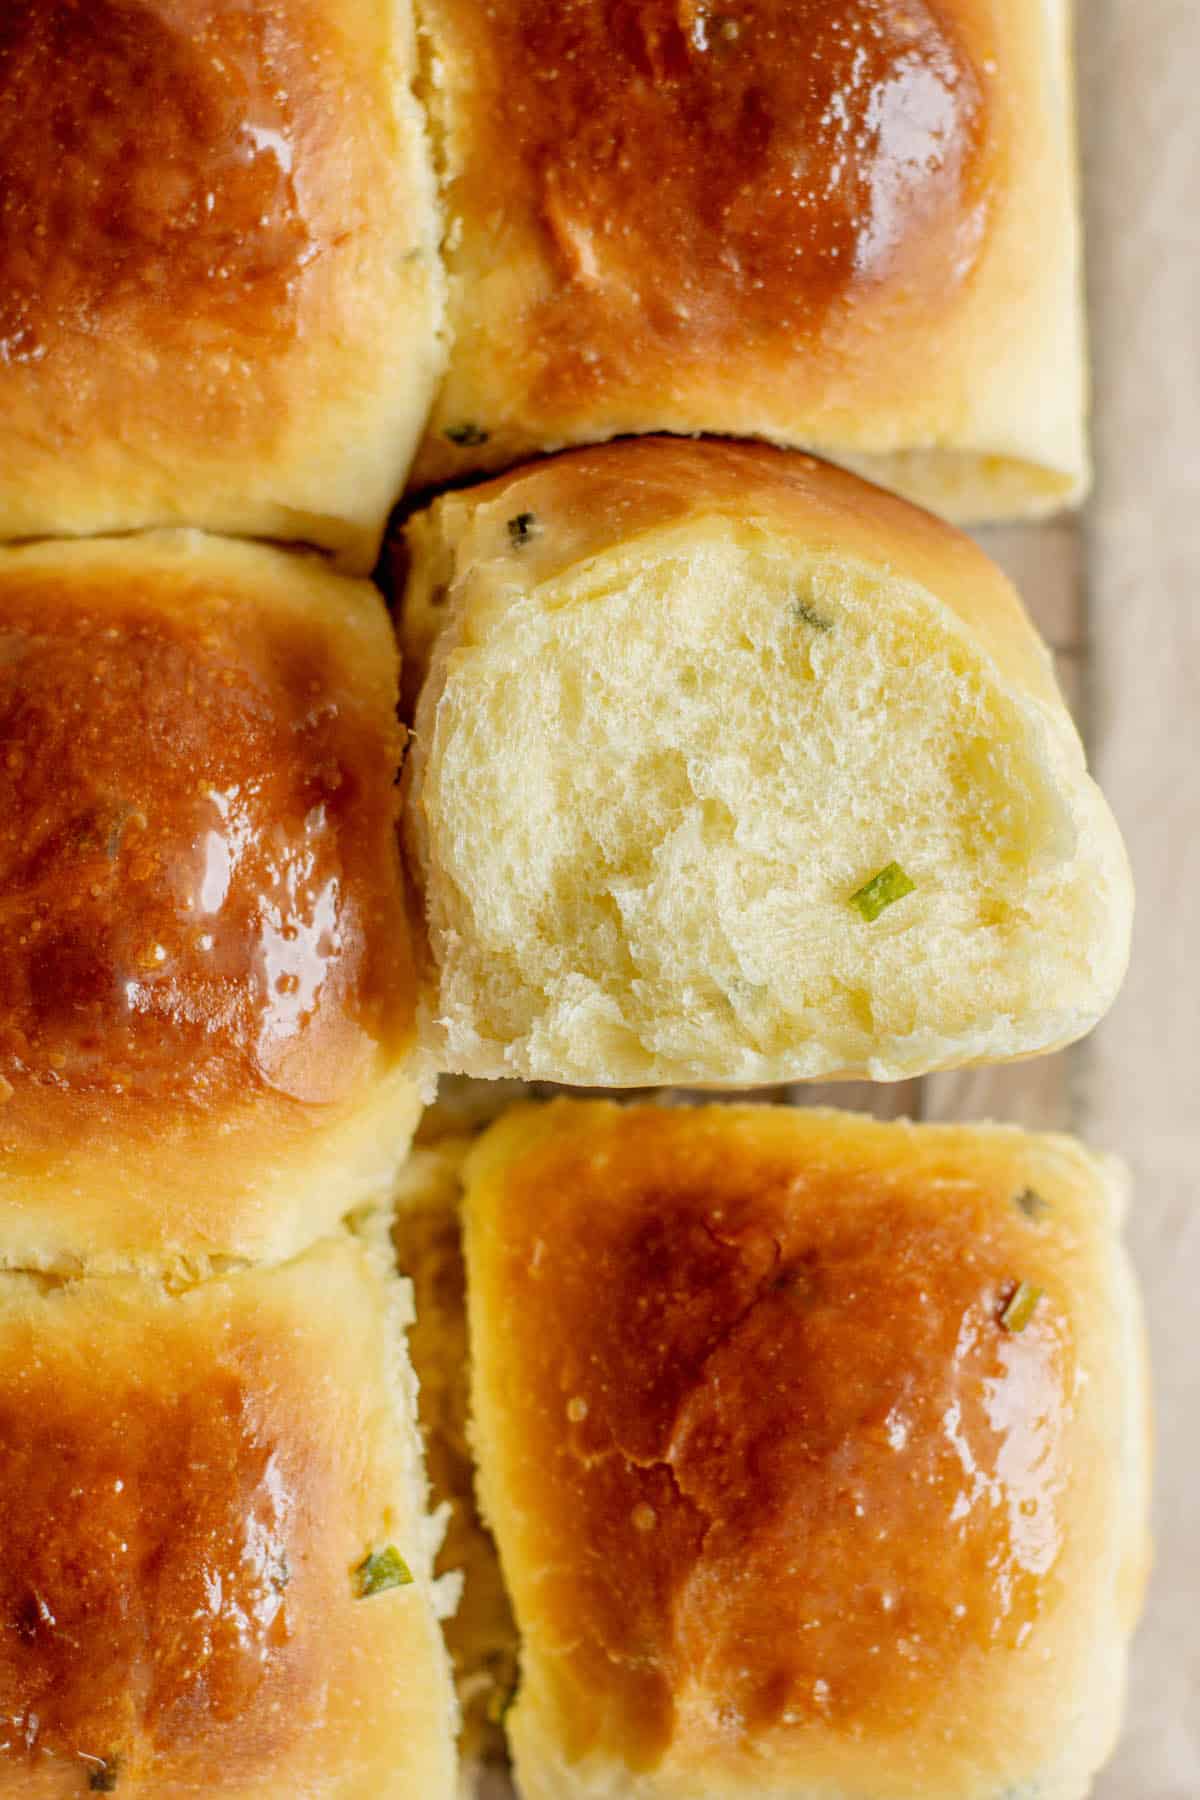 bird's eye view of baked rolls. One roll is flipped on its side.